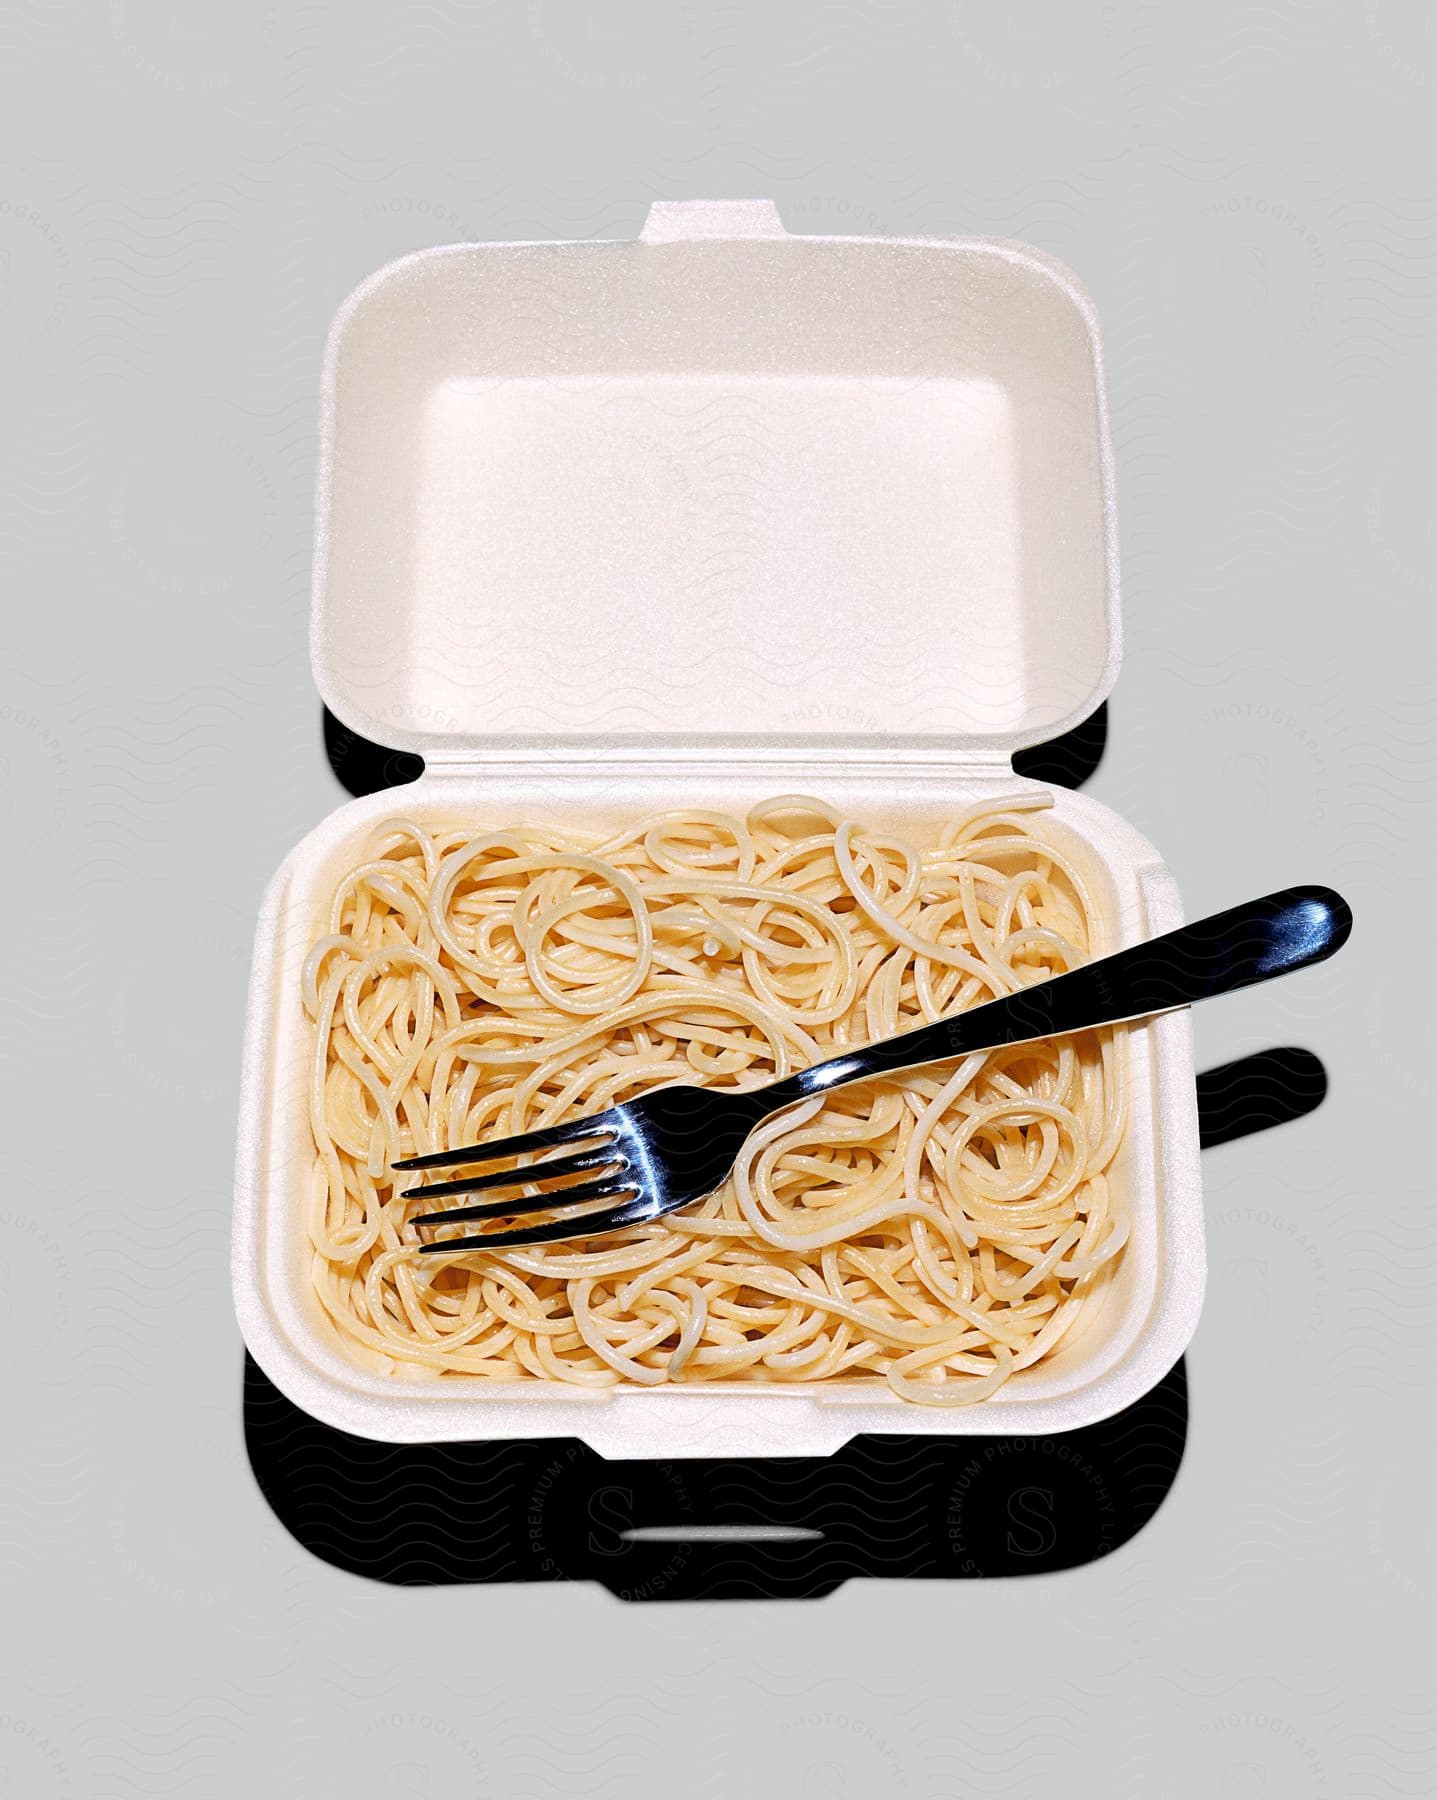 Stock photo of a take out box of pasta with a fork in it on a grey background